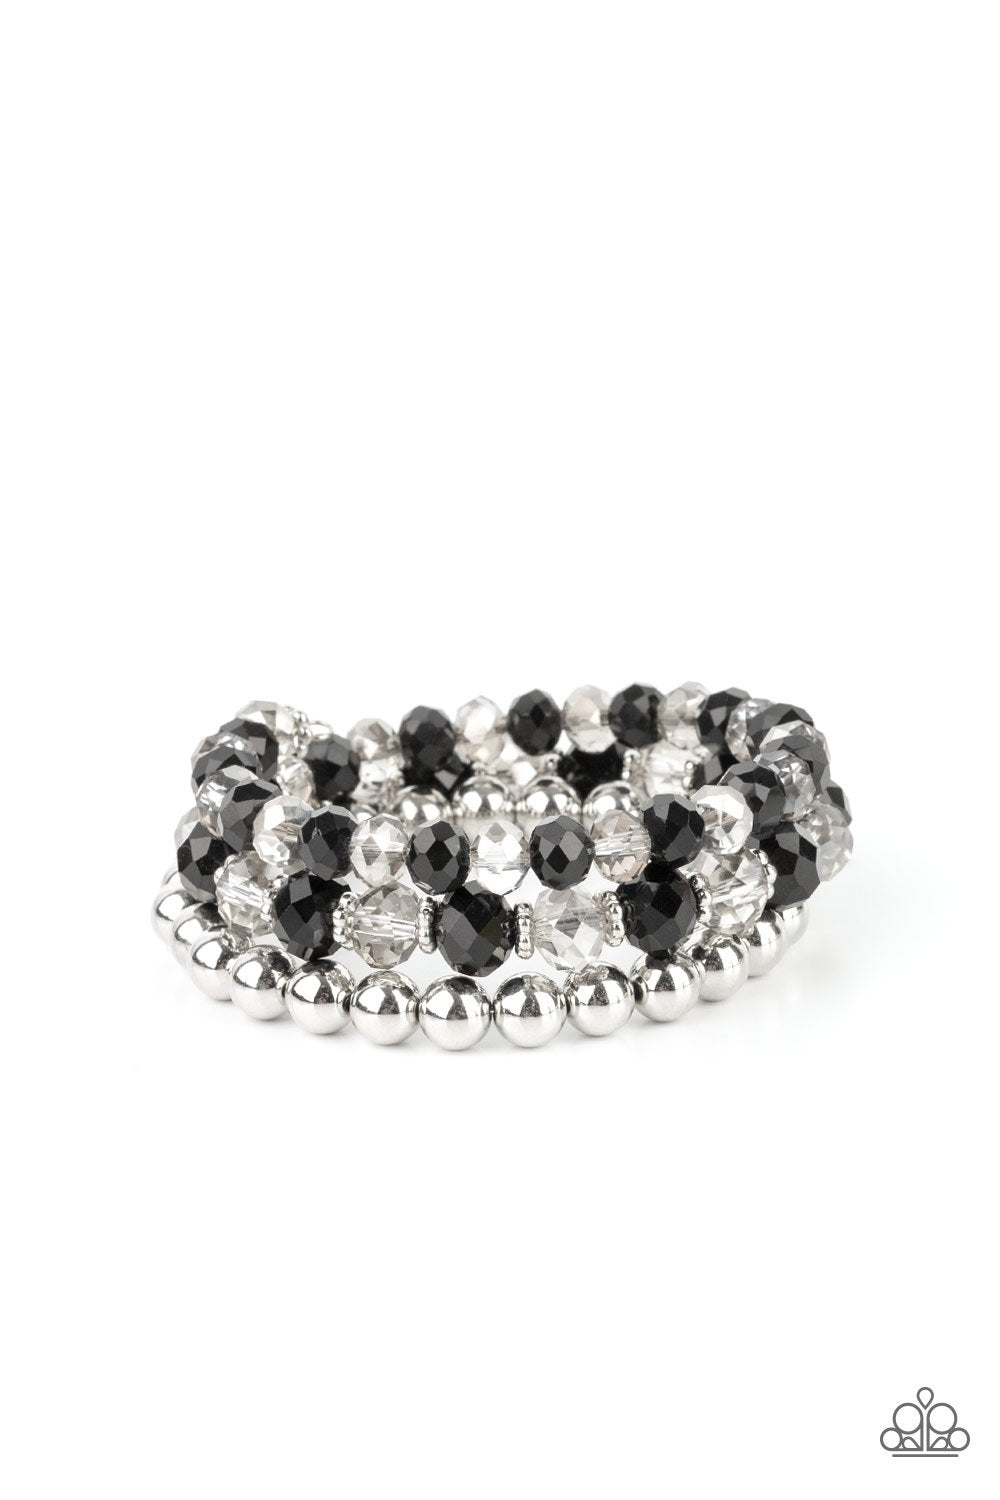 Gimme Gimme Black, Smoky and Silver Infinity Wrap Bracelet - Paparazzi Accessories 2021 Convention Exclusive- lightbox - CarasShop.com - $5 Jewelry by Cara Jewels